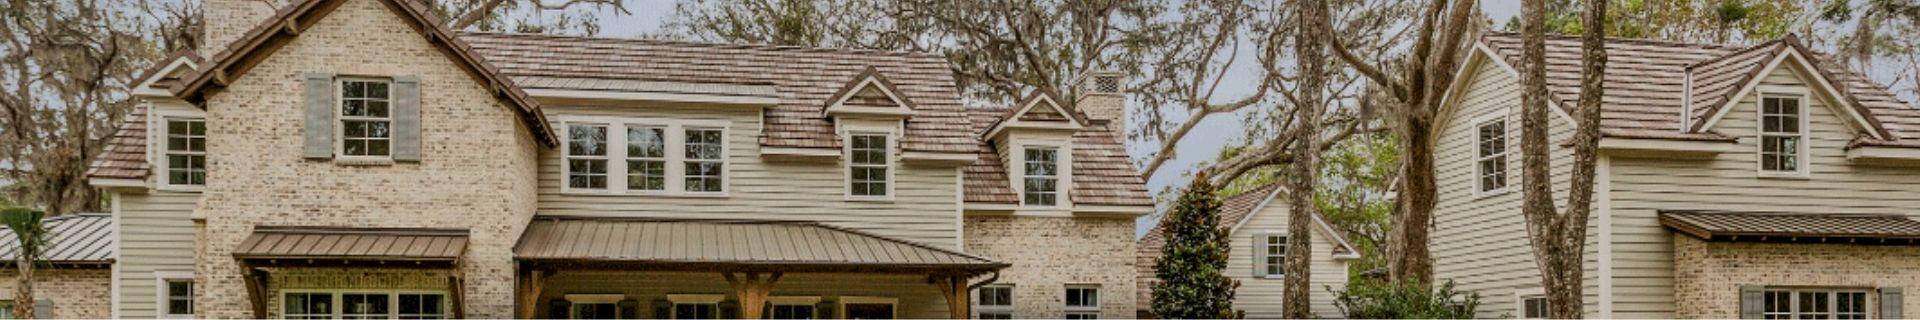 Ludowici Clay Roof Tile